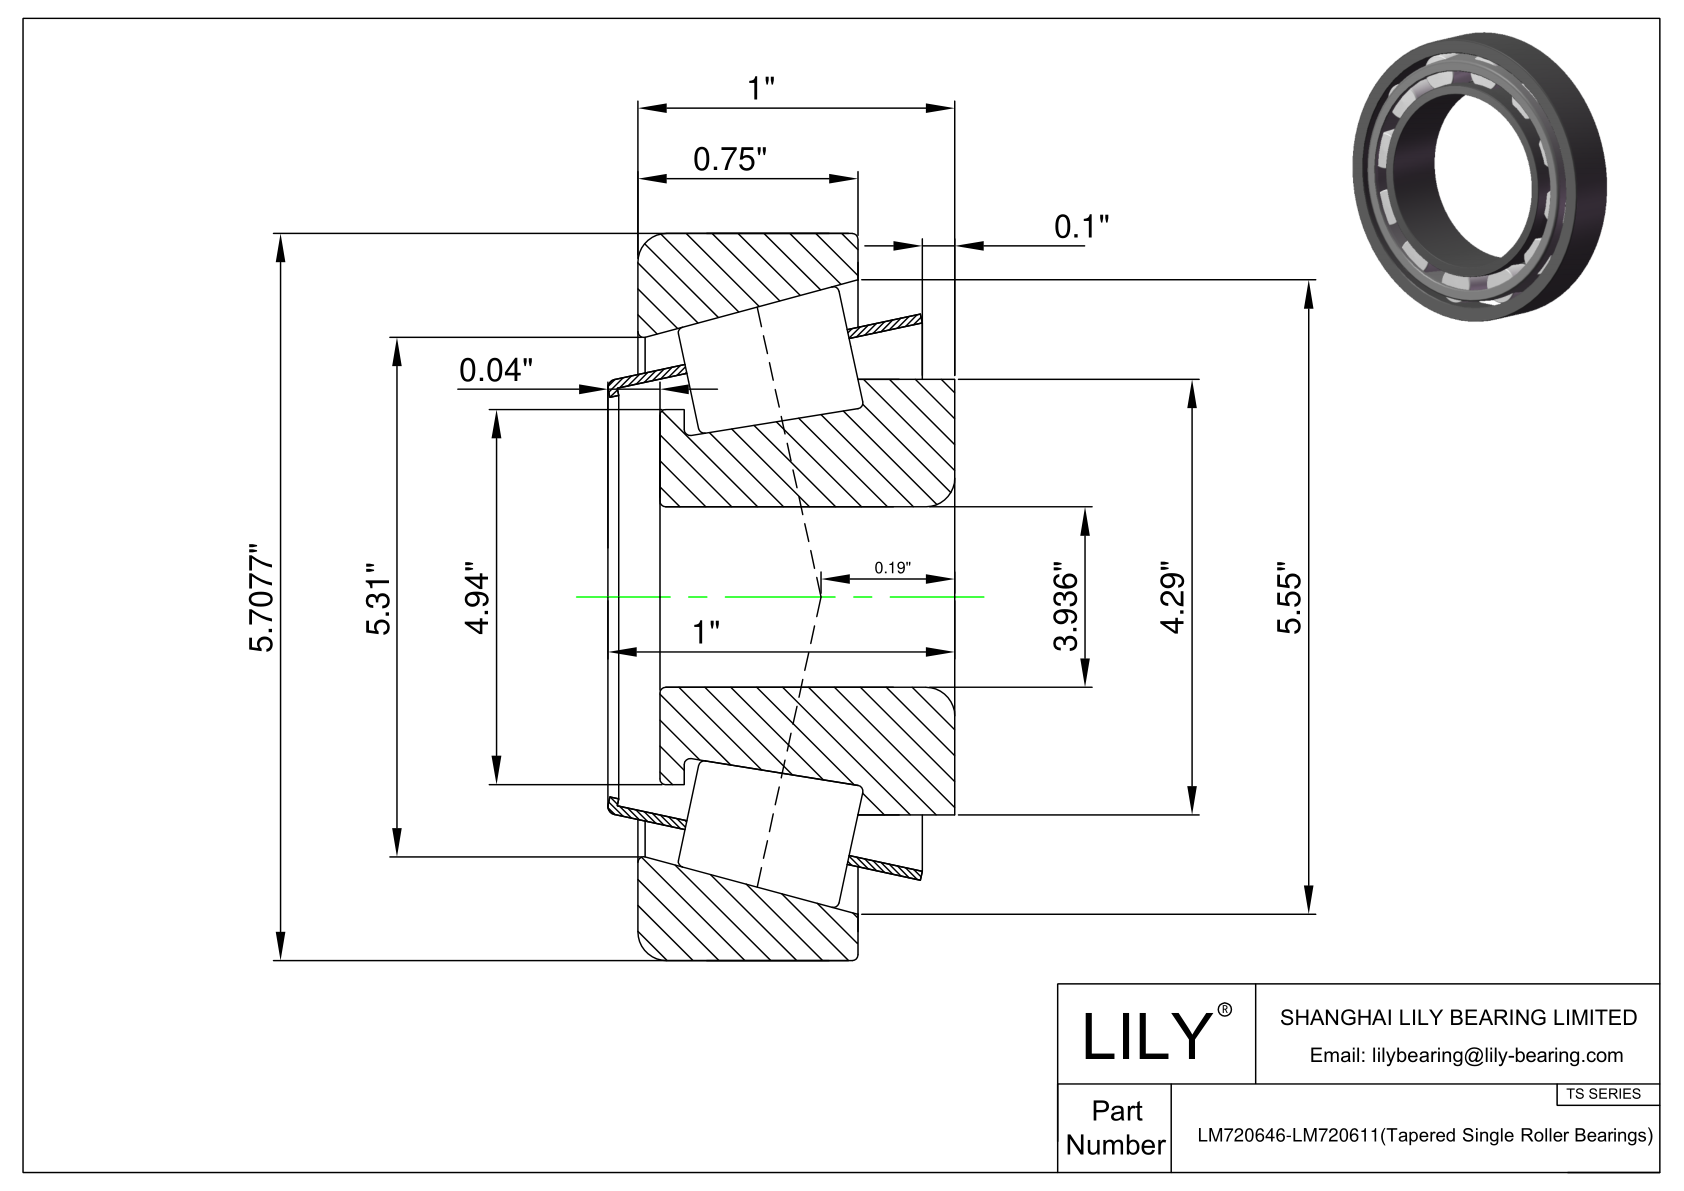 LM720646-LM720611 TS (Tapered Single Roller Bearings) (Imperial) cad drawing